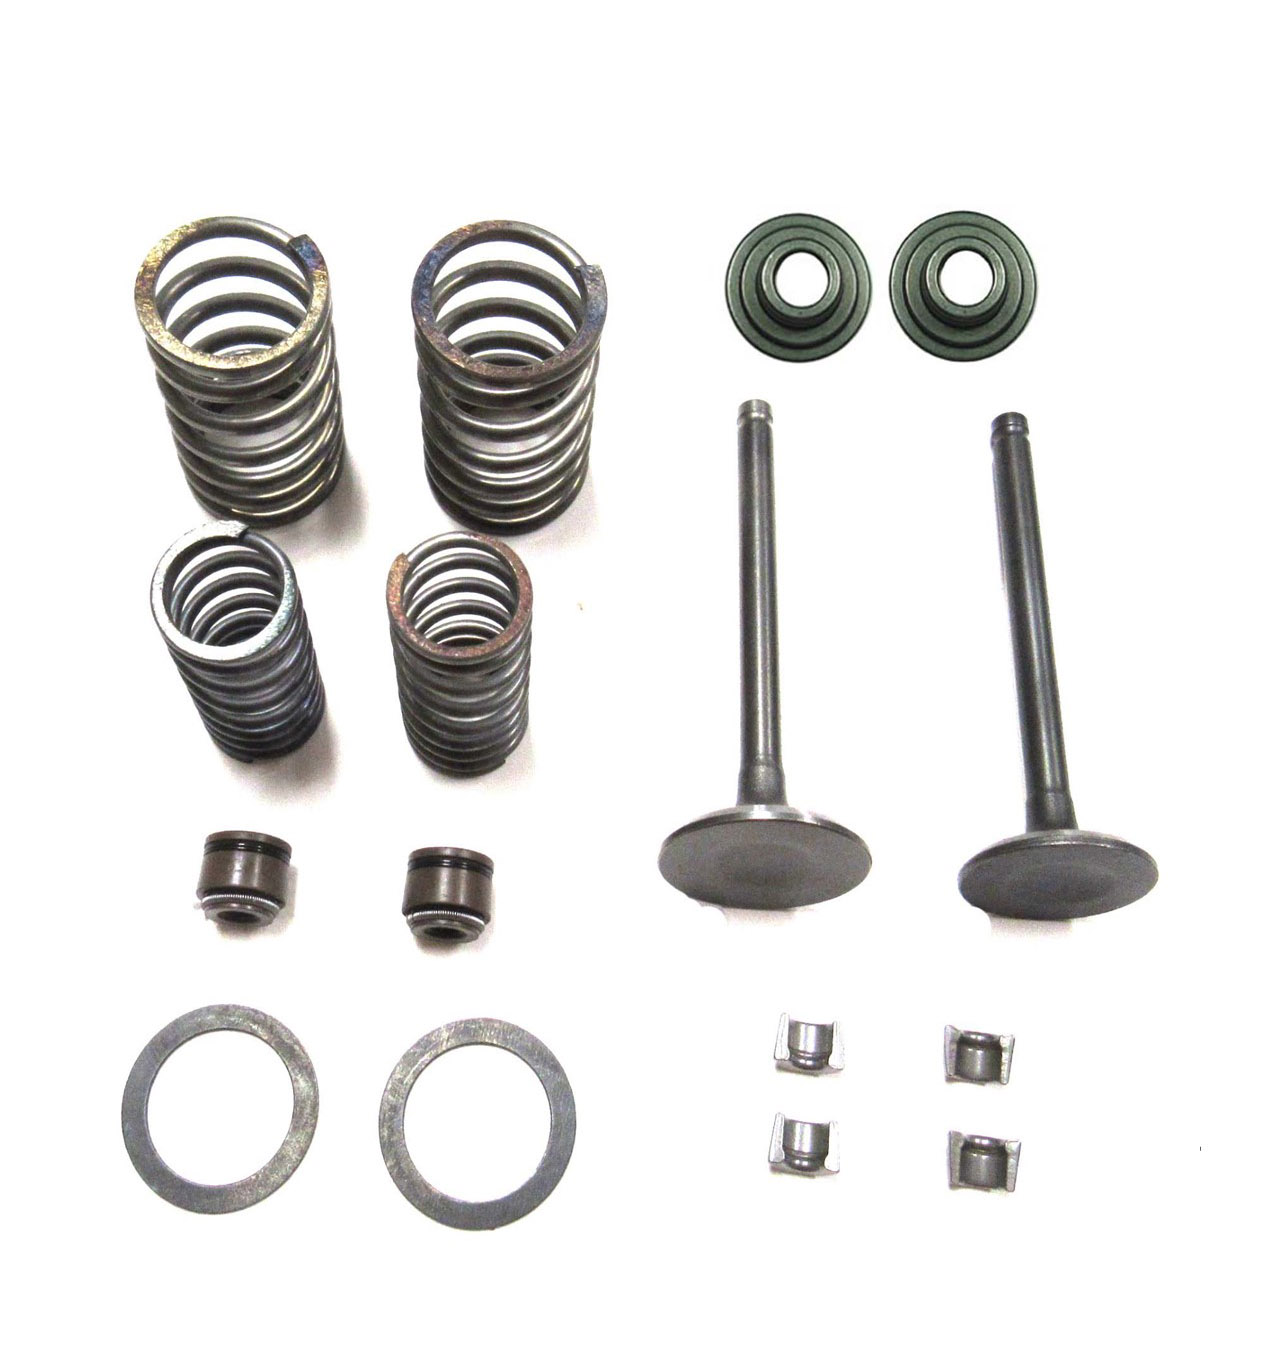 GY6-50 Valve Set 64mm Includes 2 Valves, 2 Springs, 2 Seals & retainer clips - Click Image to Close